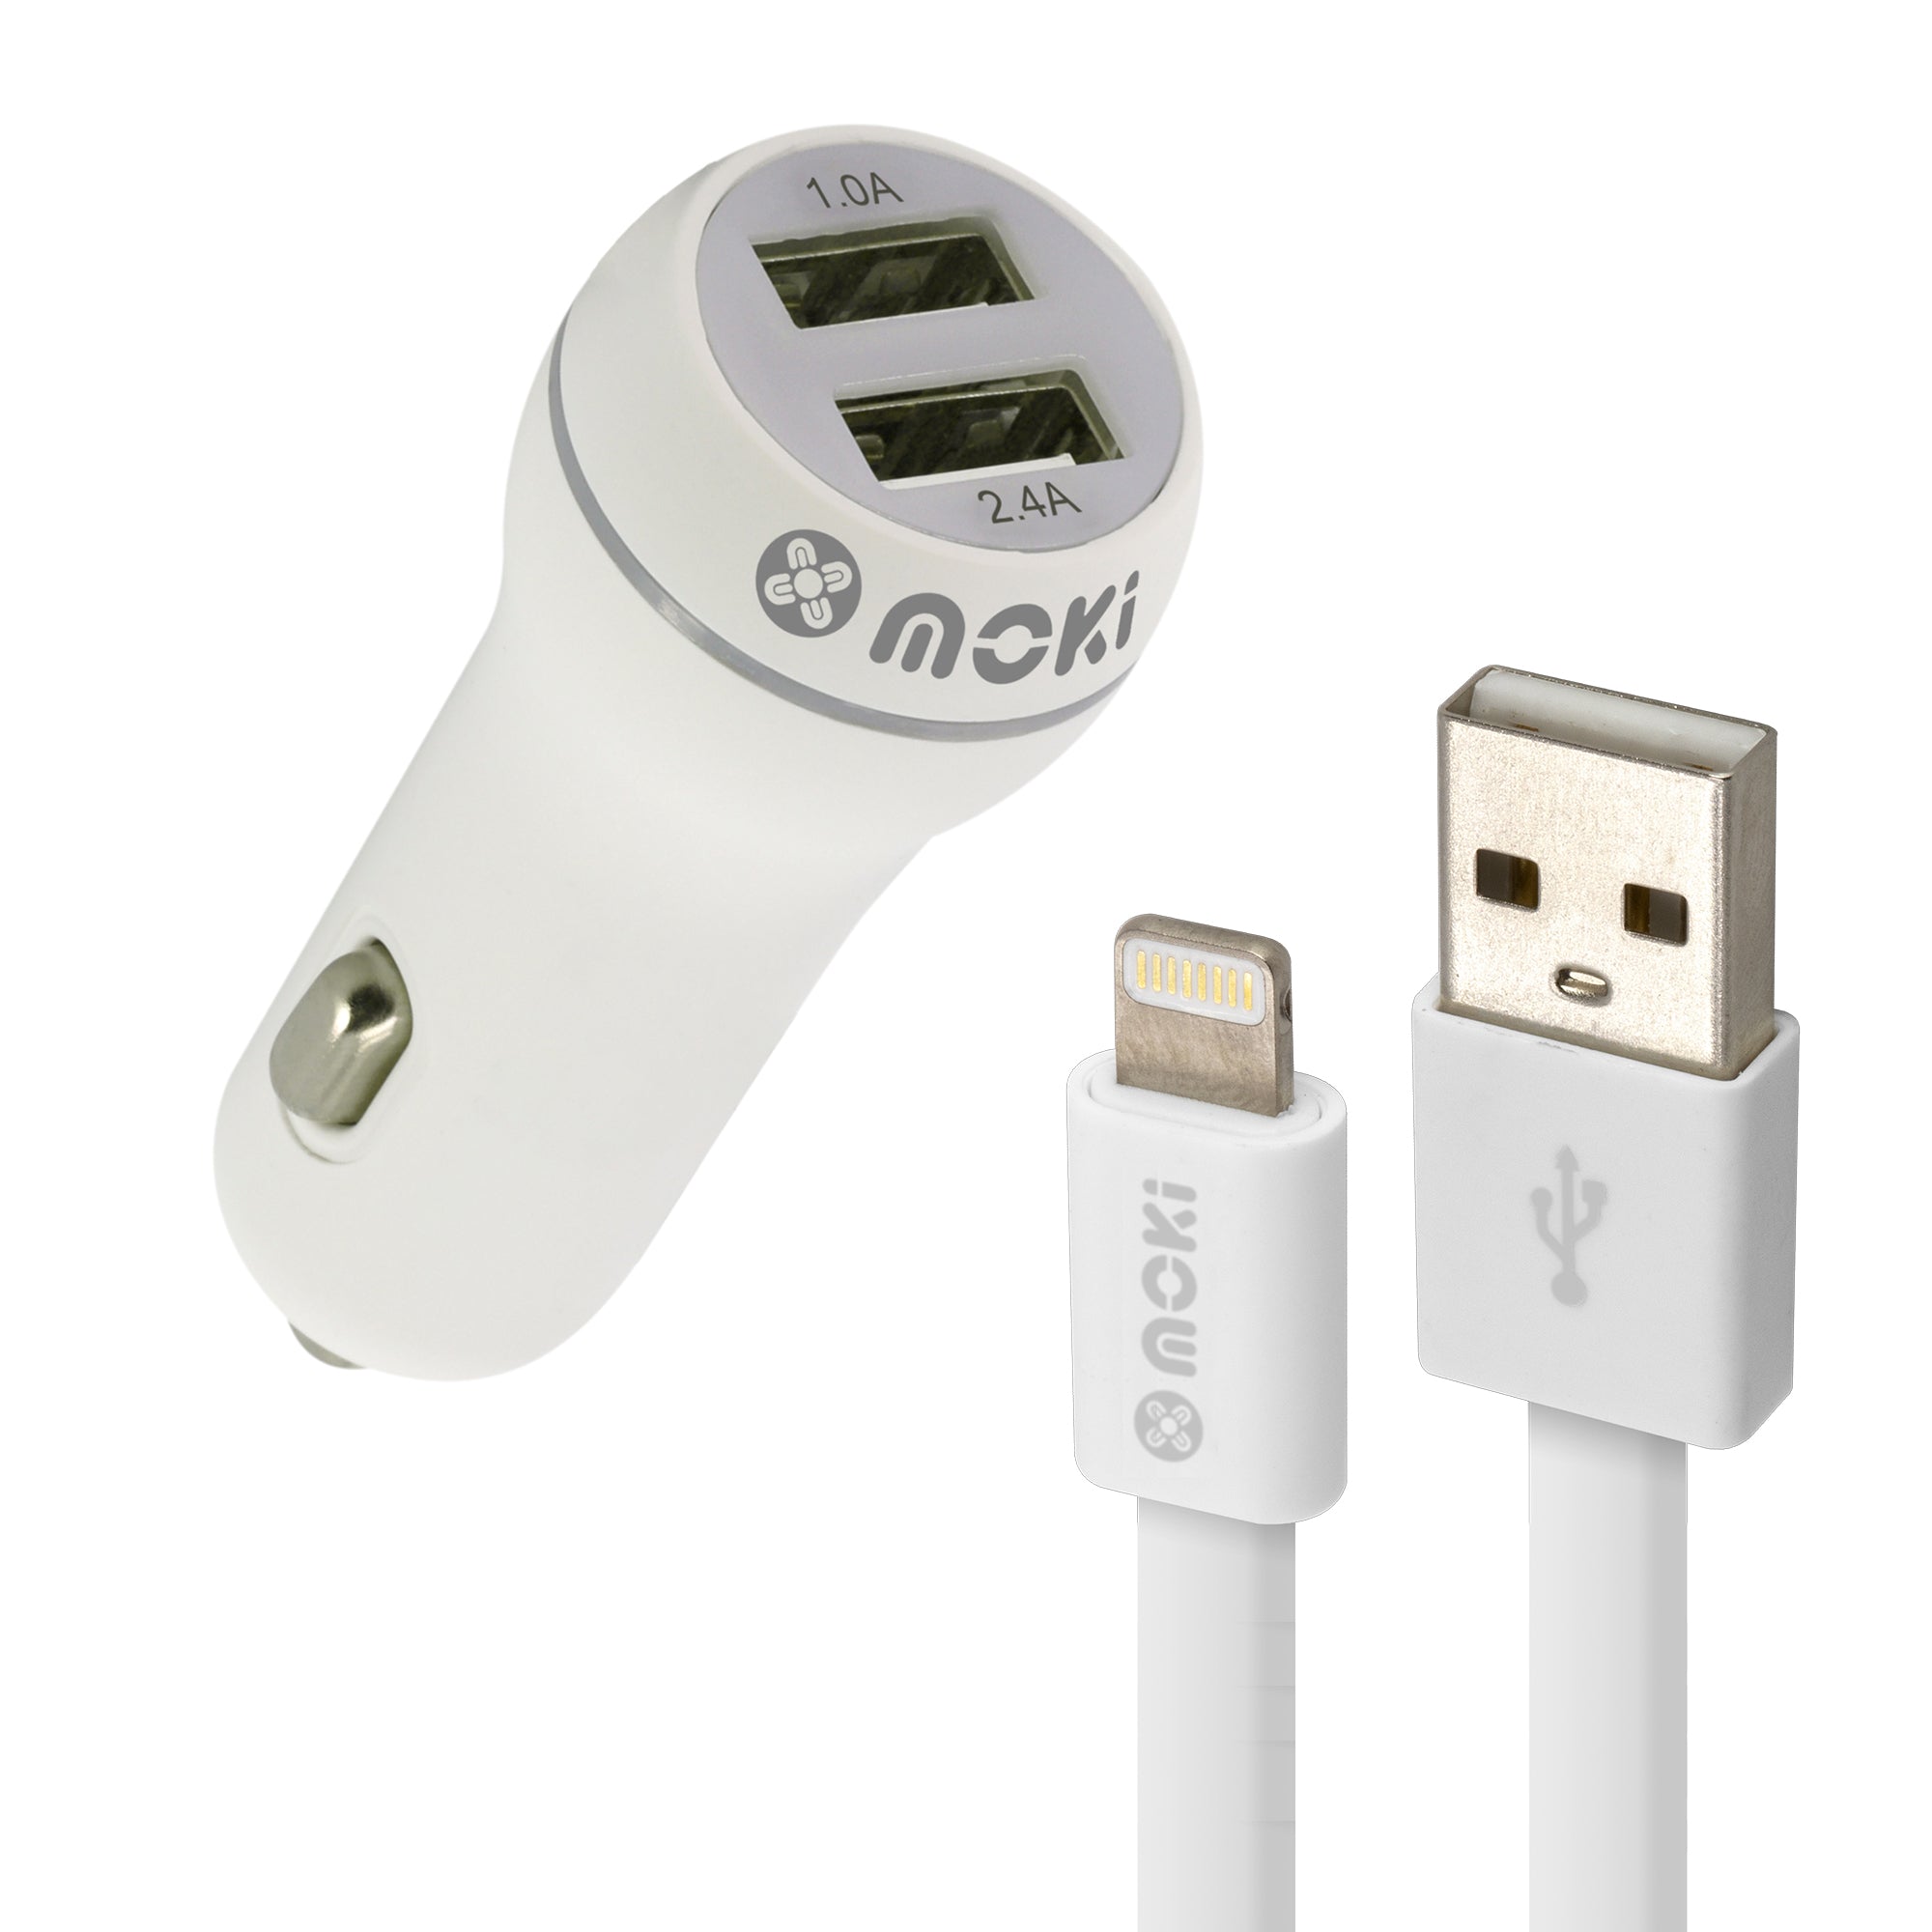 Lightning to USB SynCharge Cable Pack